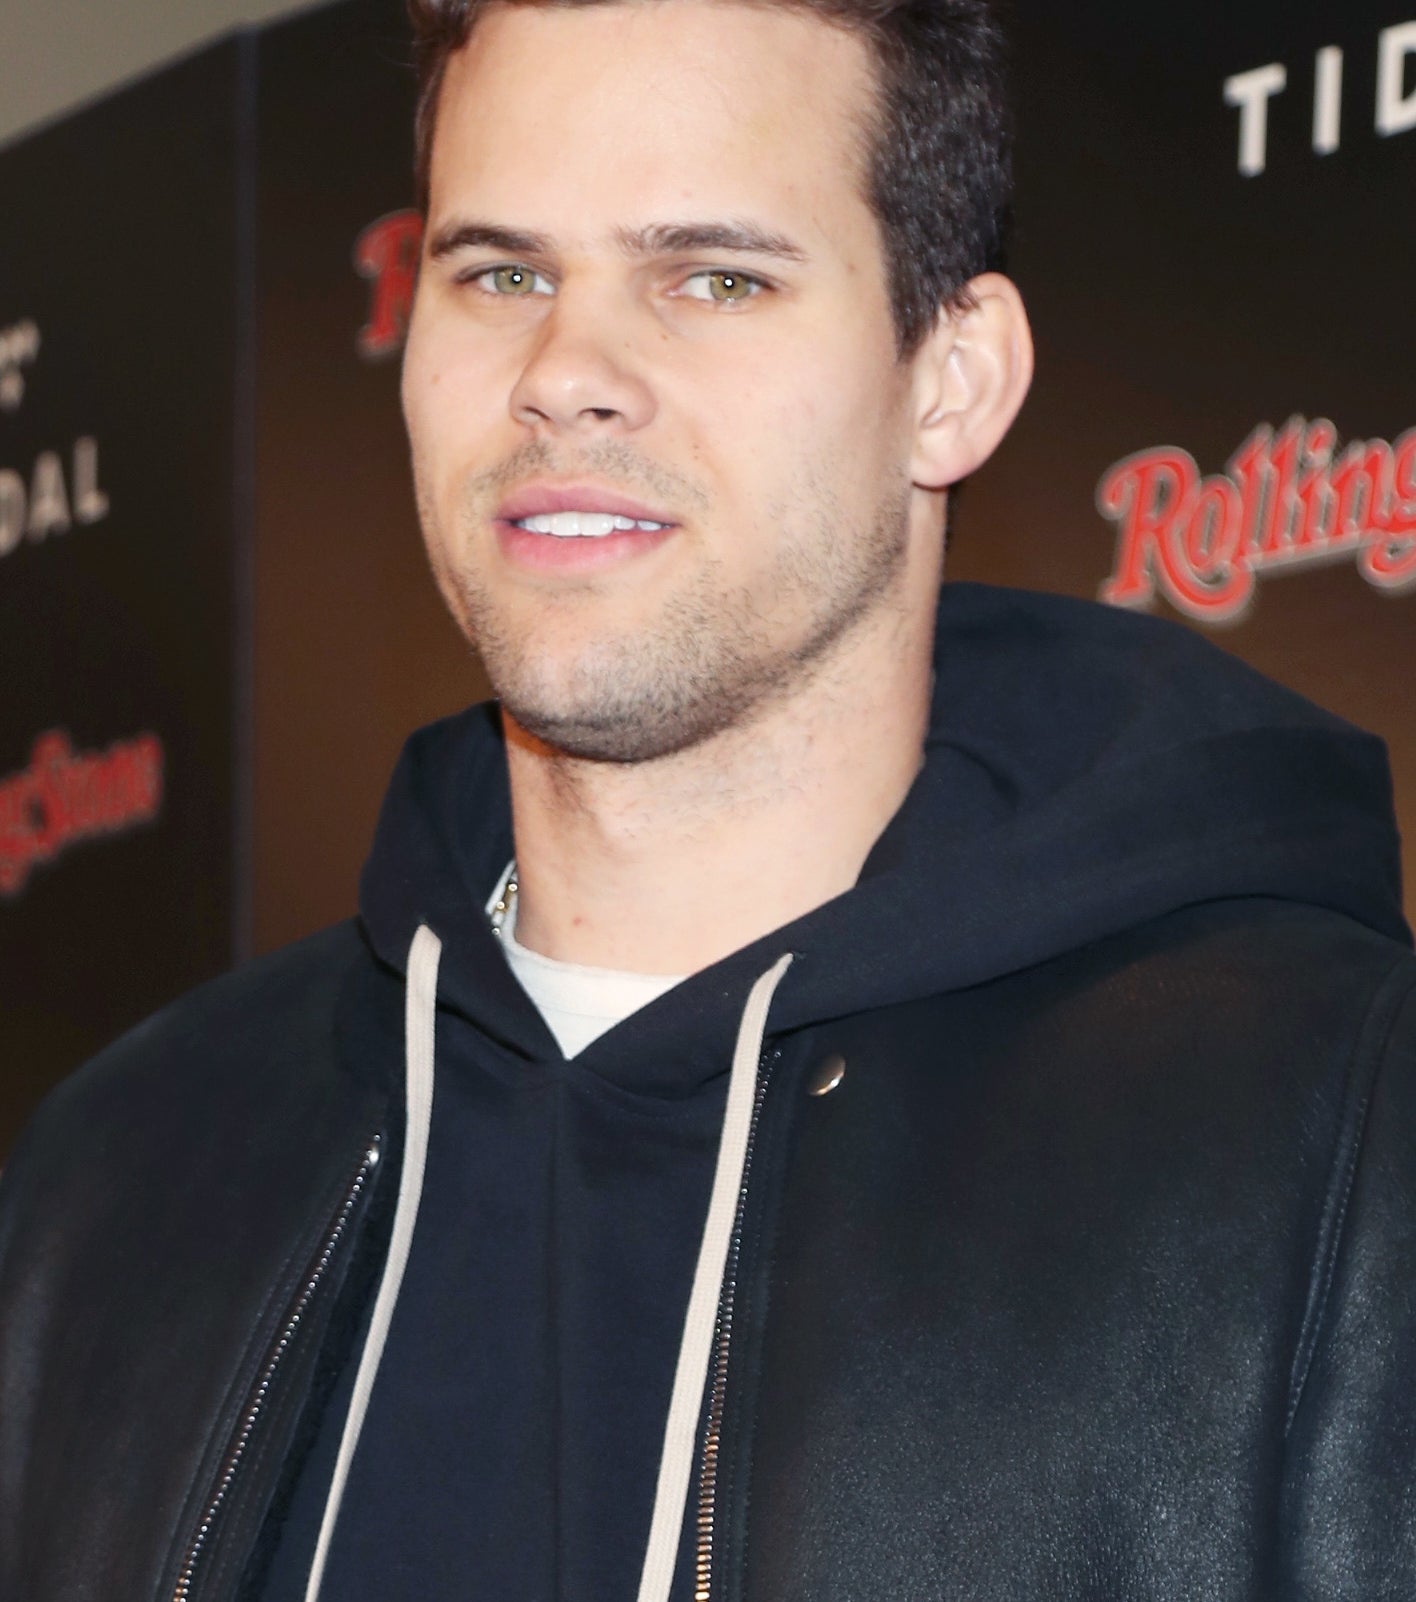 Kris Humphries at Rolling Stone Live: Minneapolis presented by Mercedes-Benz and TIDAL